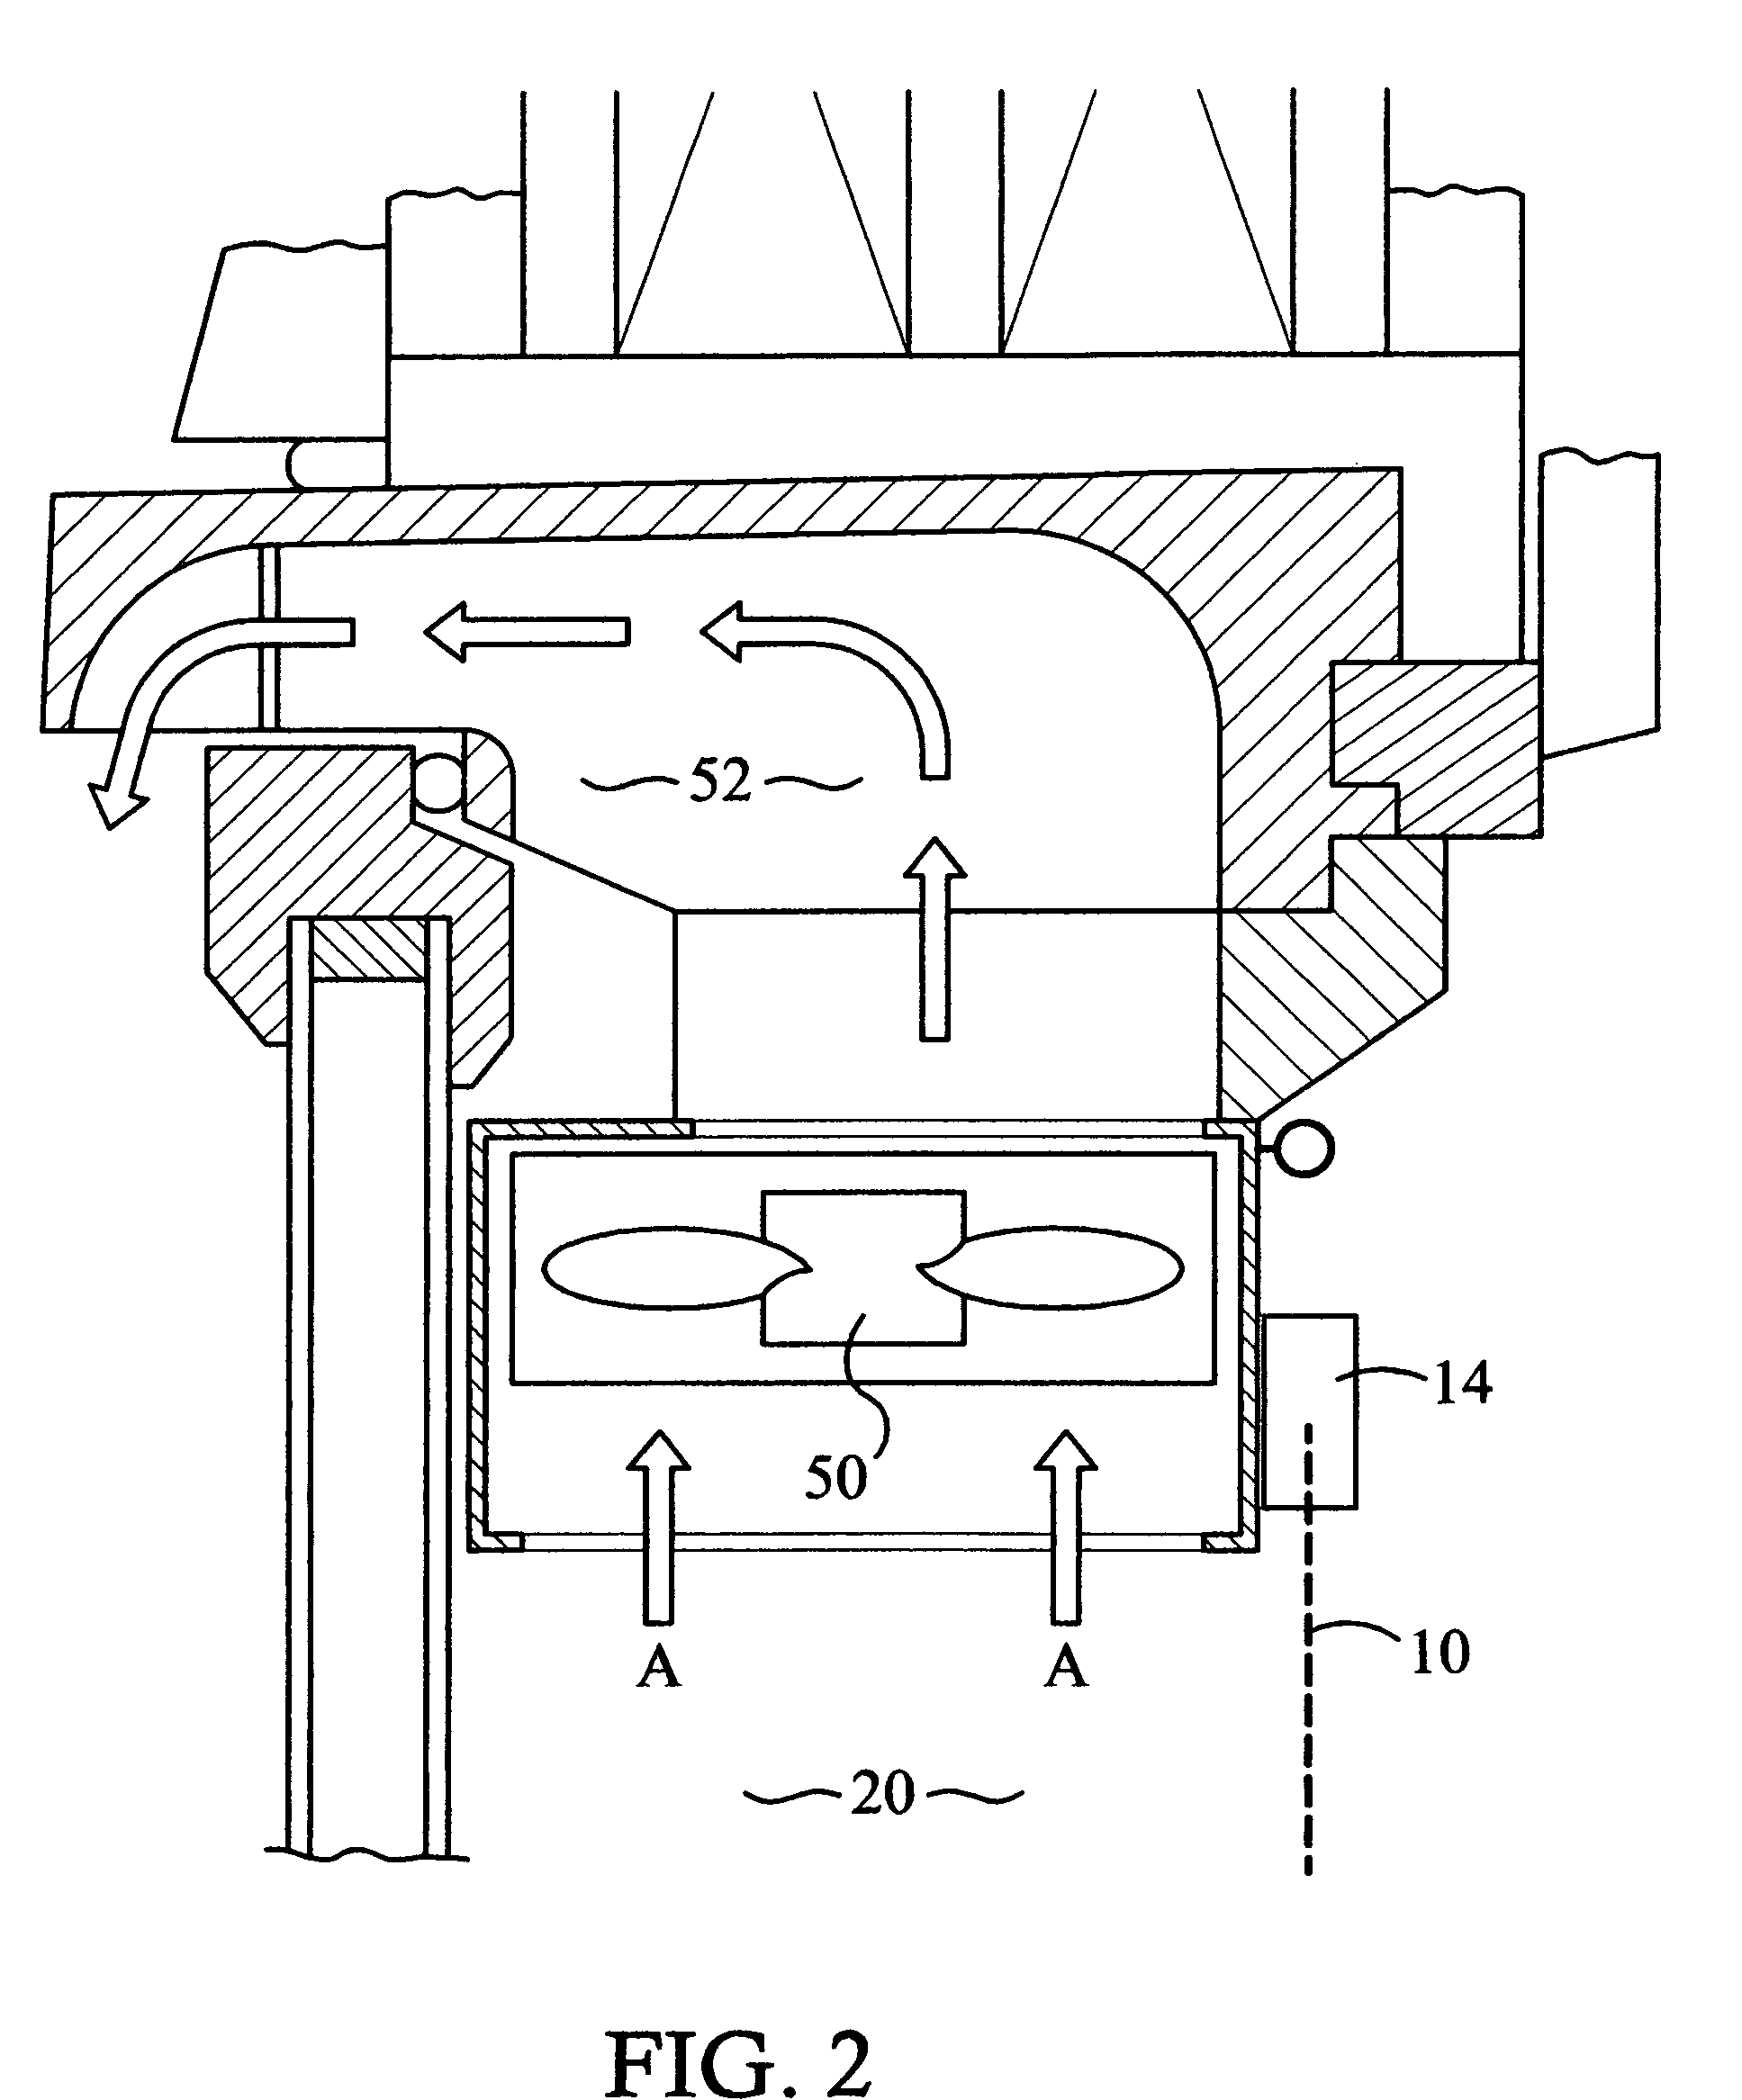 Solar heat absorbing and distributing system